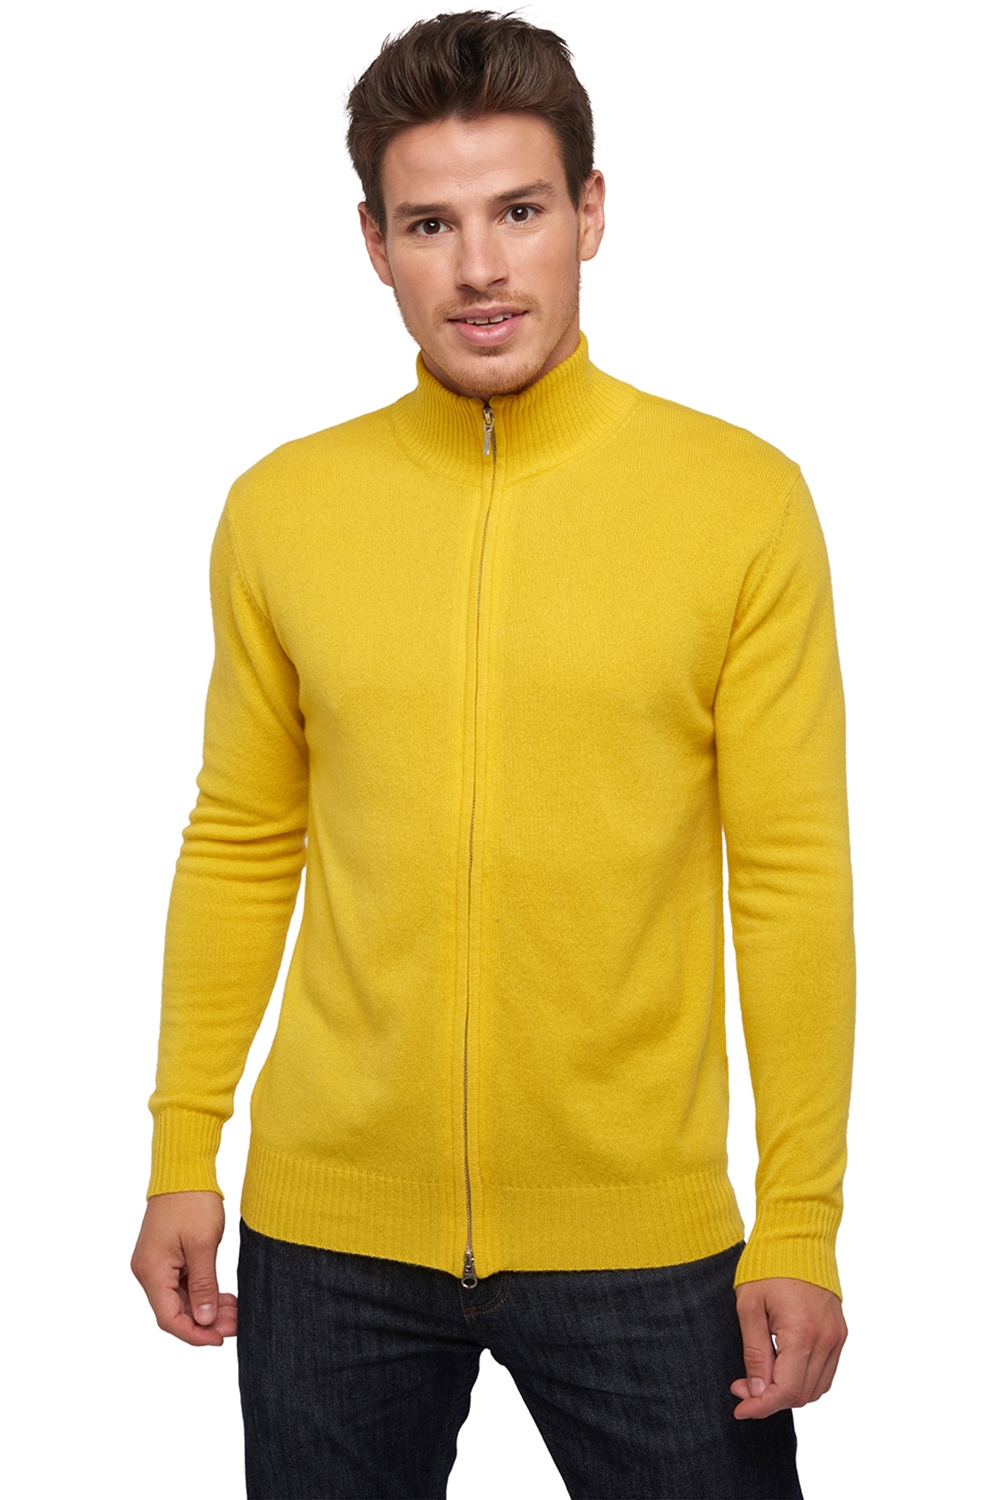 Cachemire petits prix homme thobias first sunny yellow xl